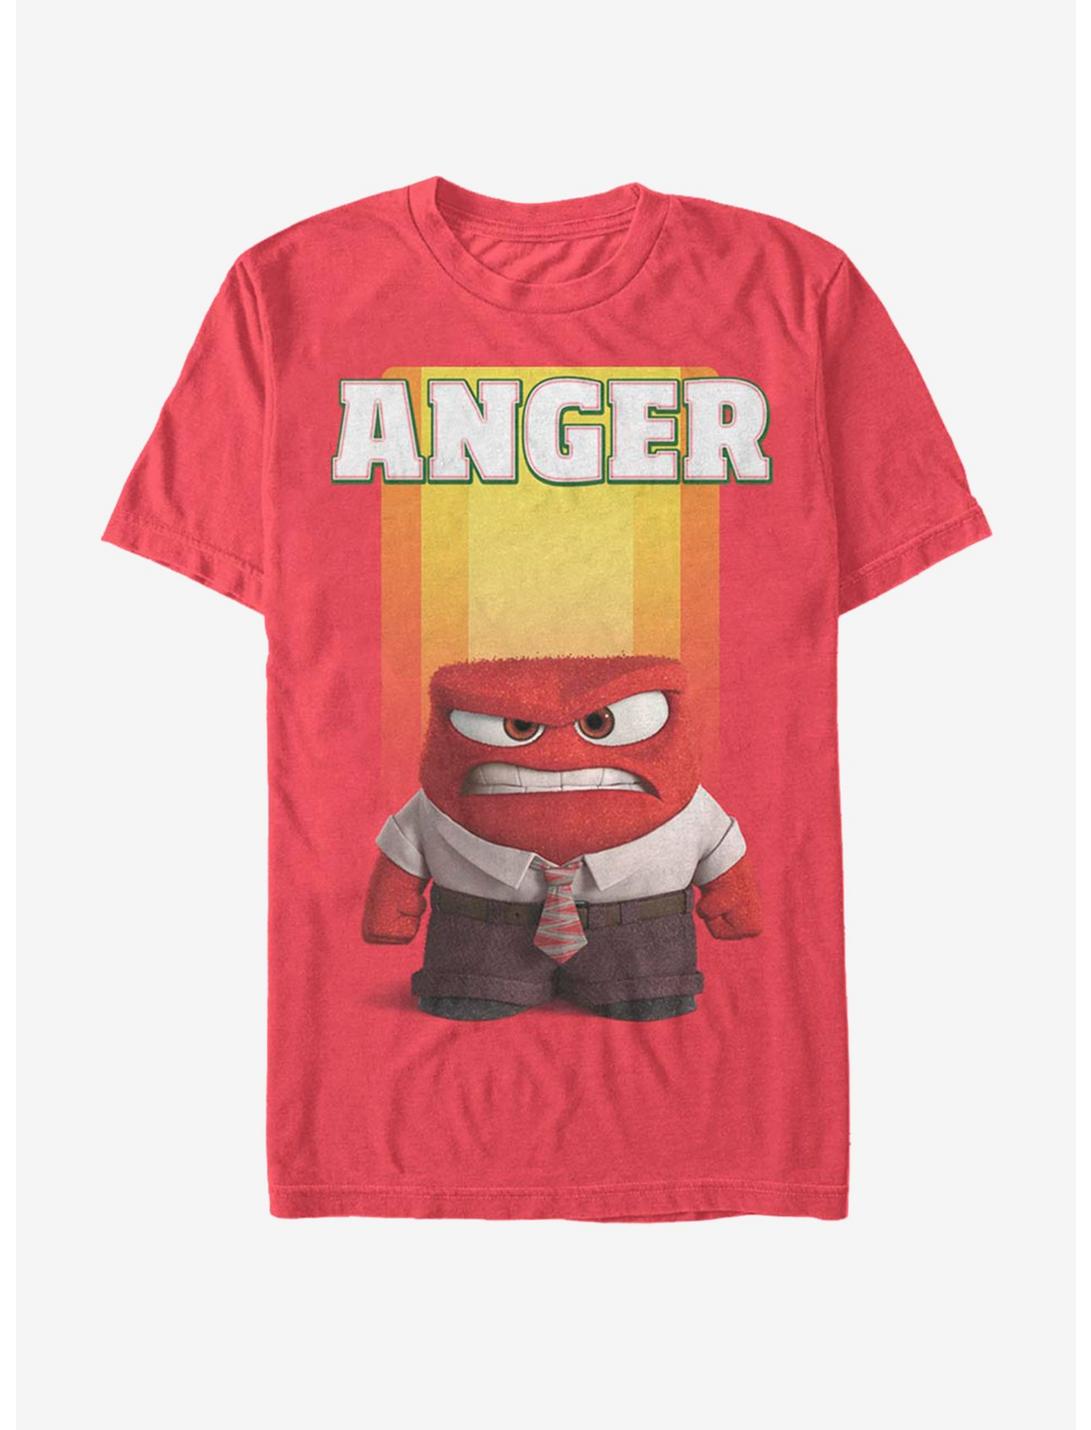 Order Now Disney Pixar Inside Out Angry Face Halloween Graphic T-Shirt 